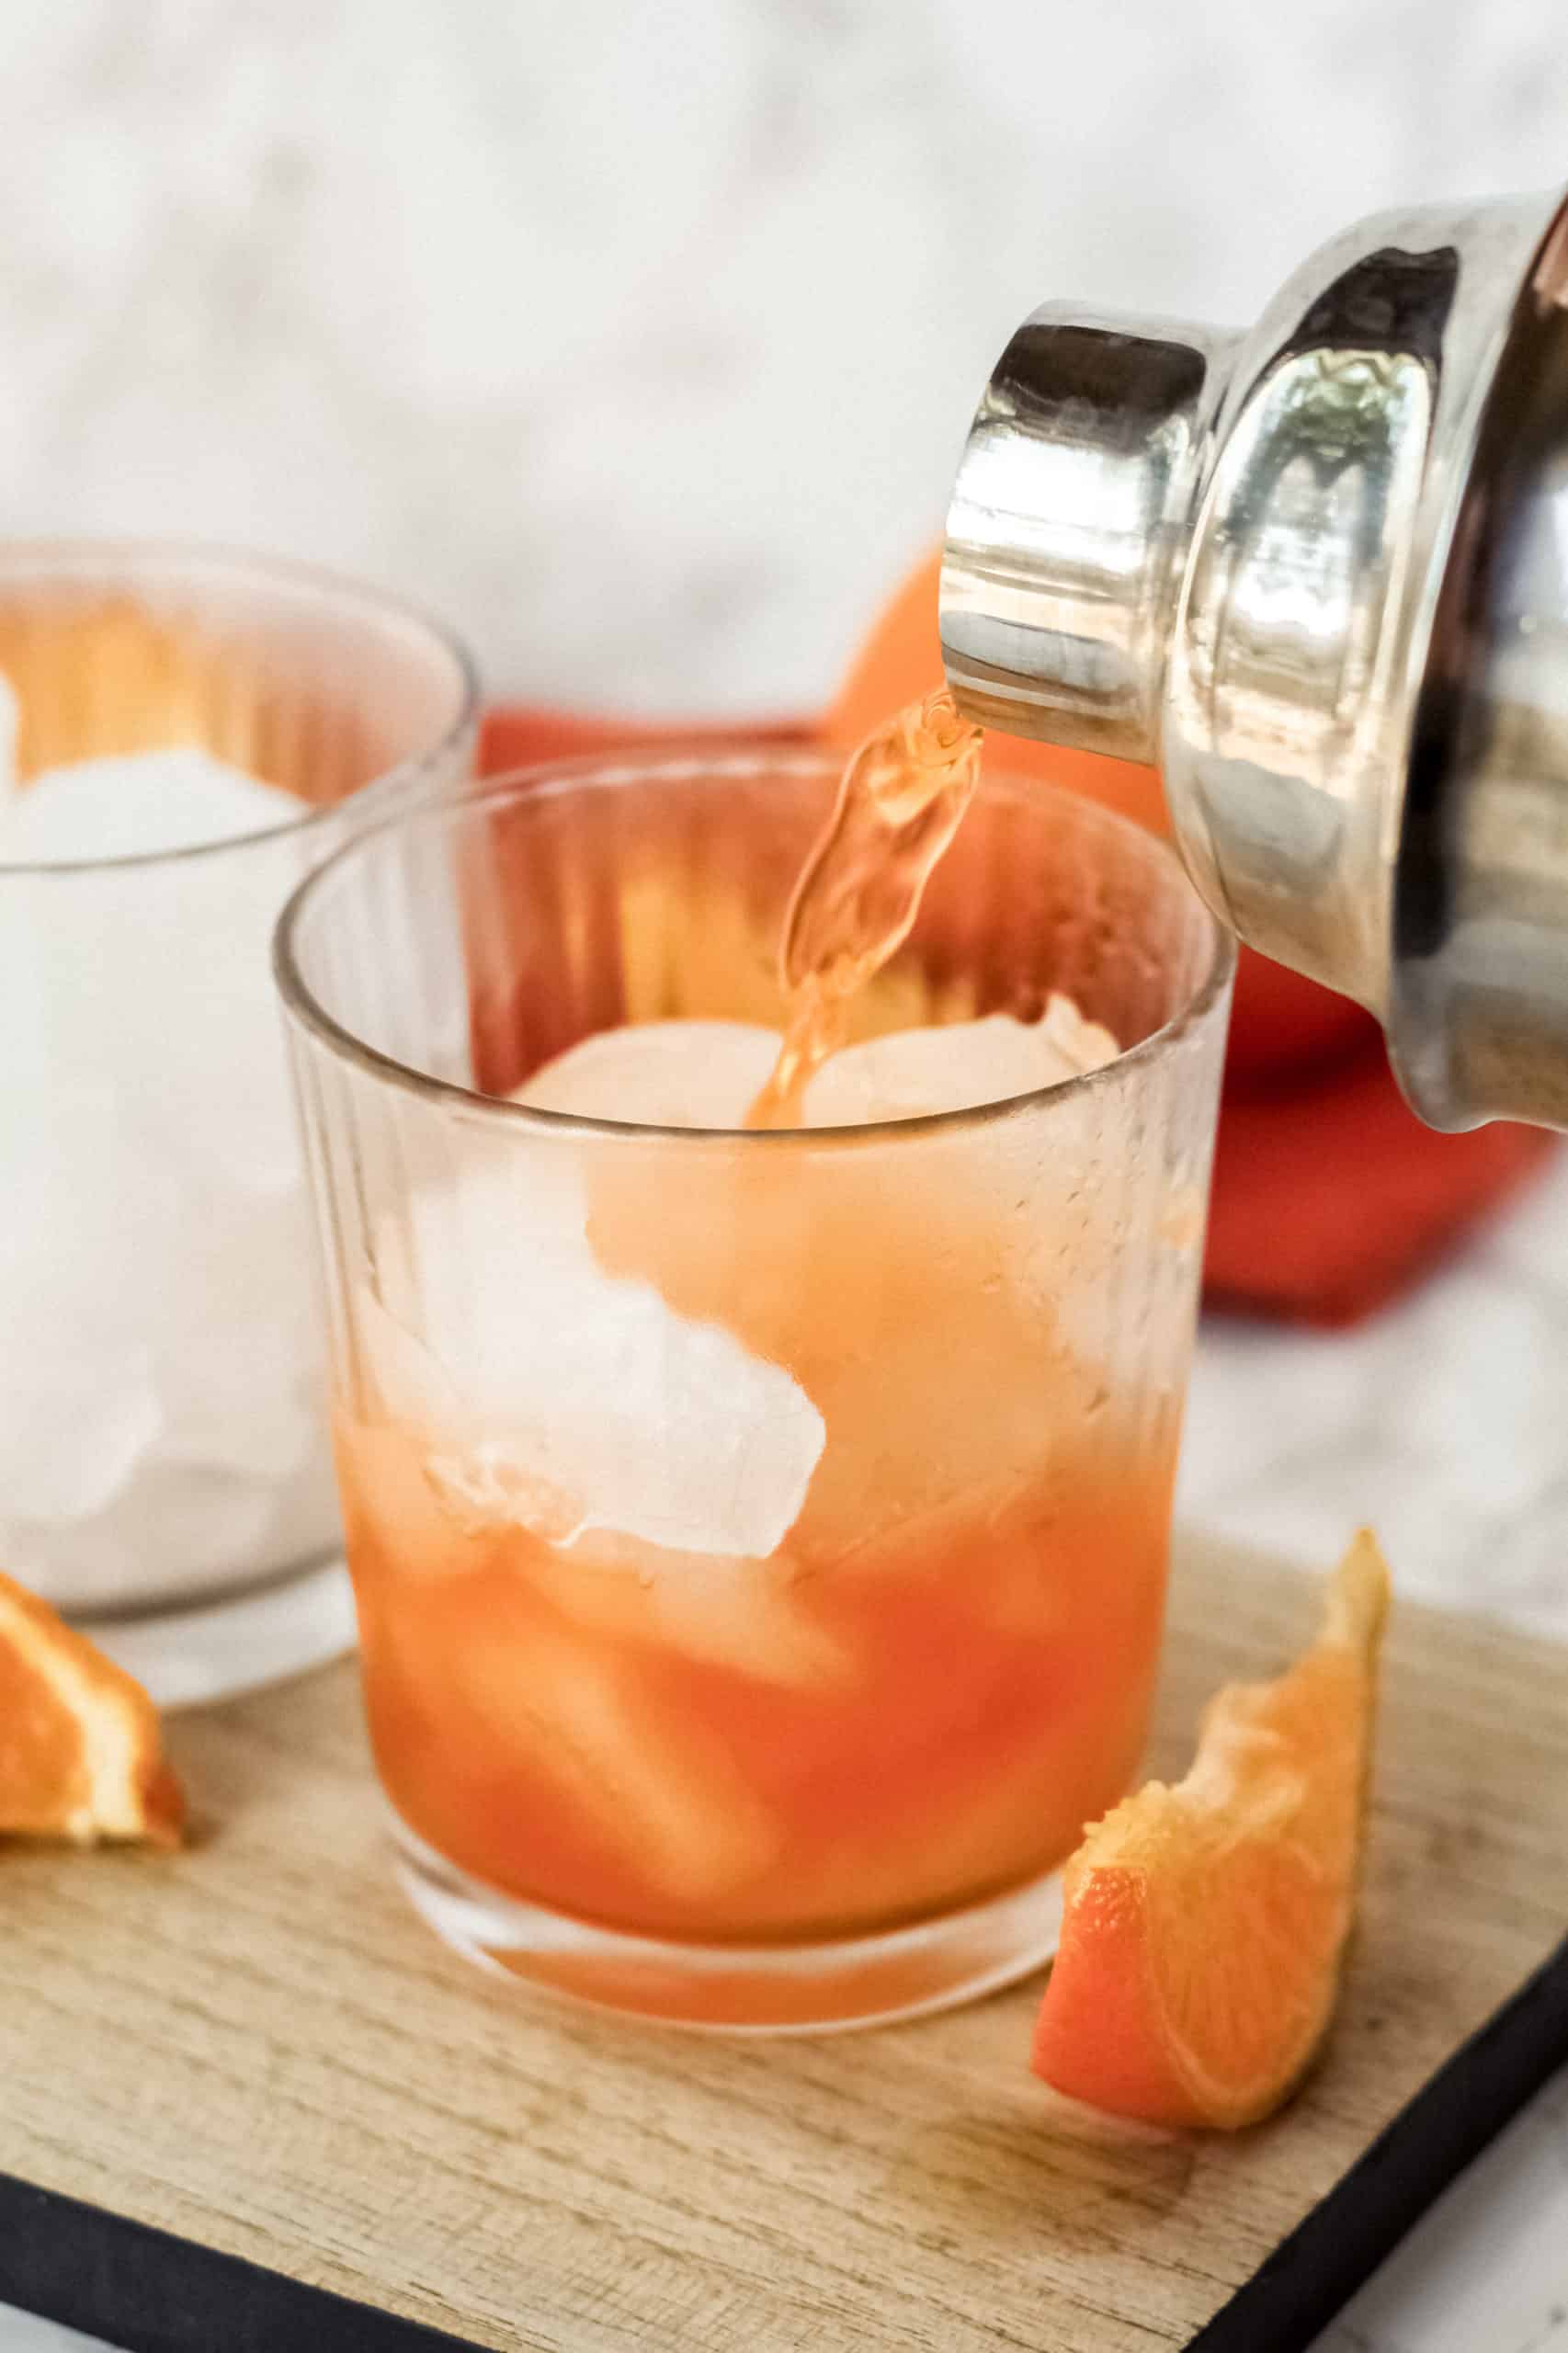 Pouring an orange thunder into a glass with ice